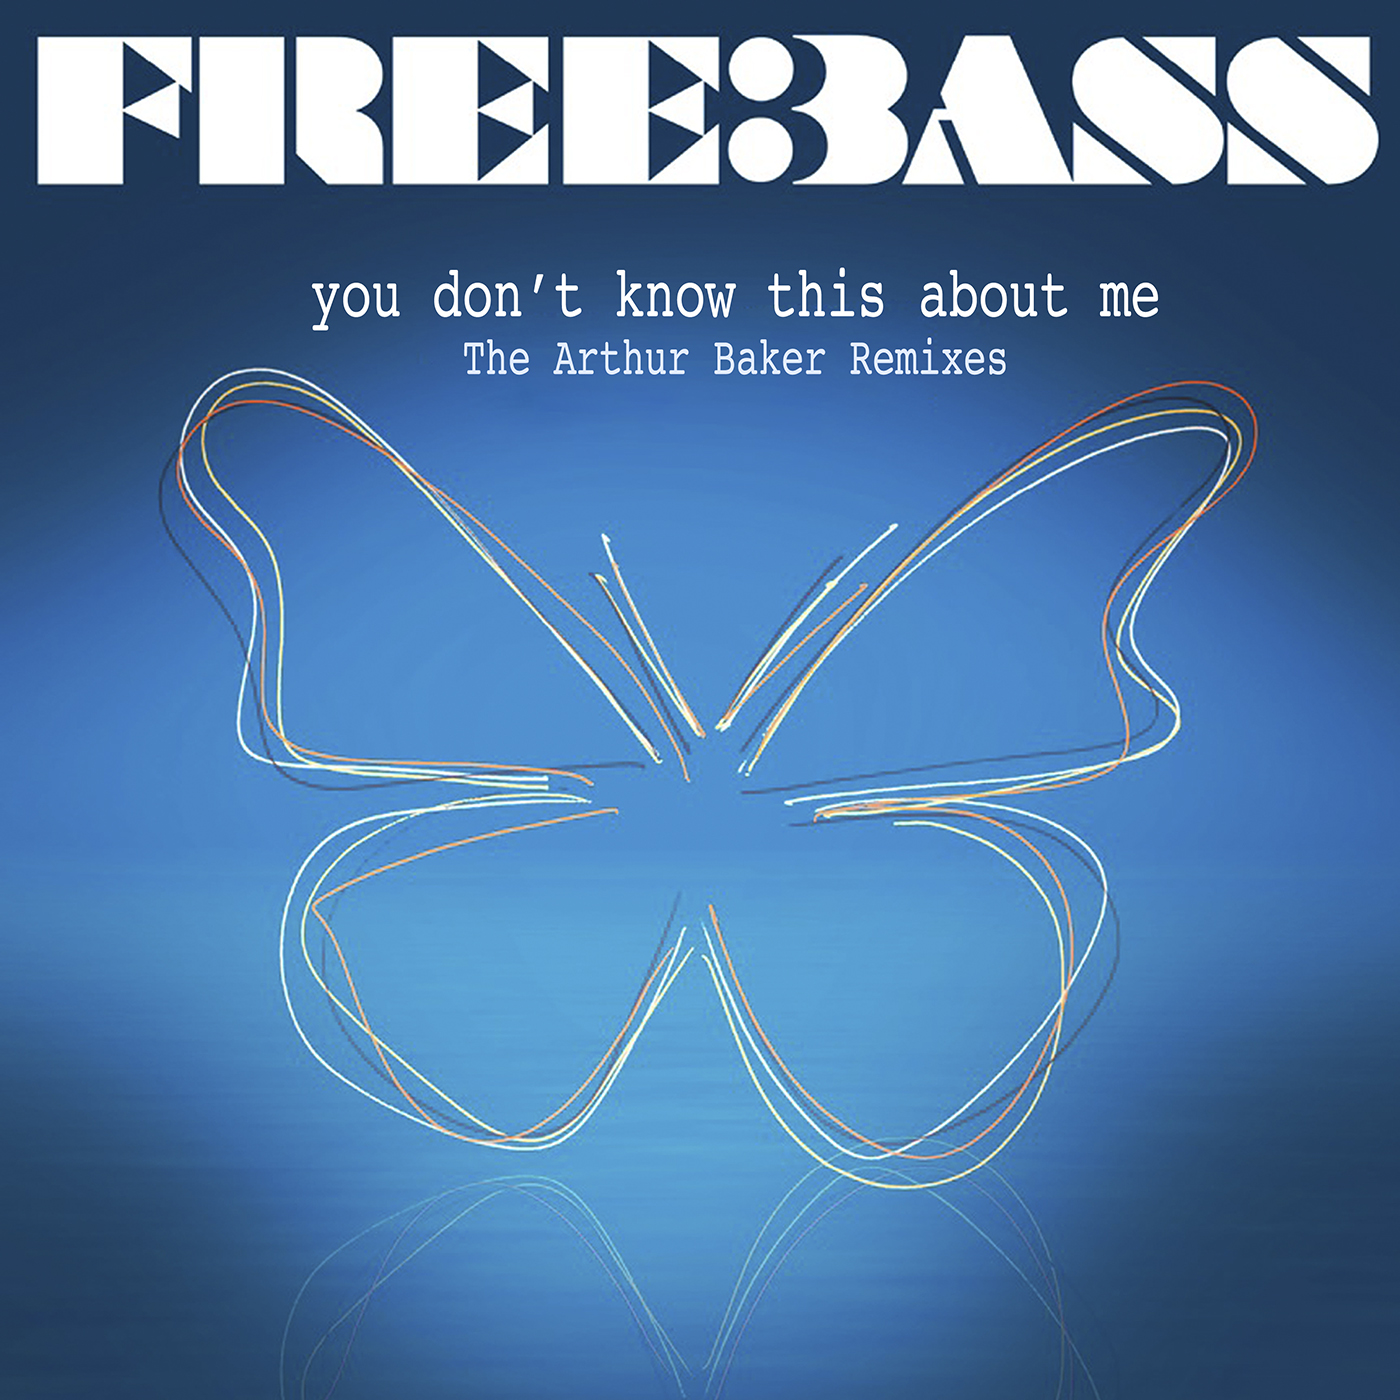 Audio: Freebass’ ‘You Don’t Know This About Me’ (Arthur Baker Mix), with Tim Burgess